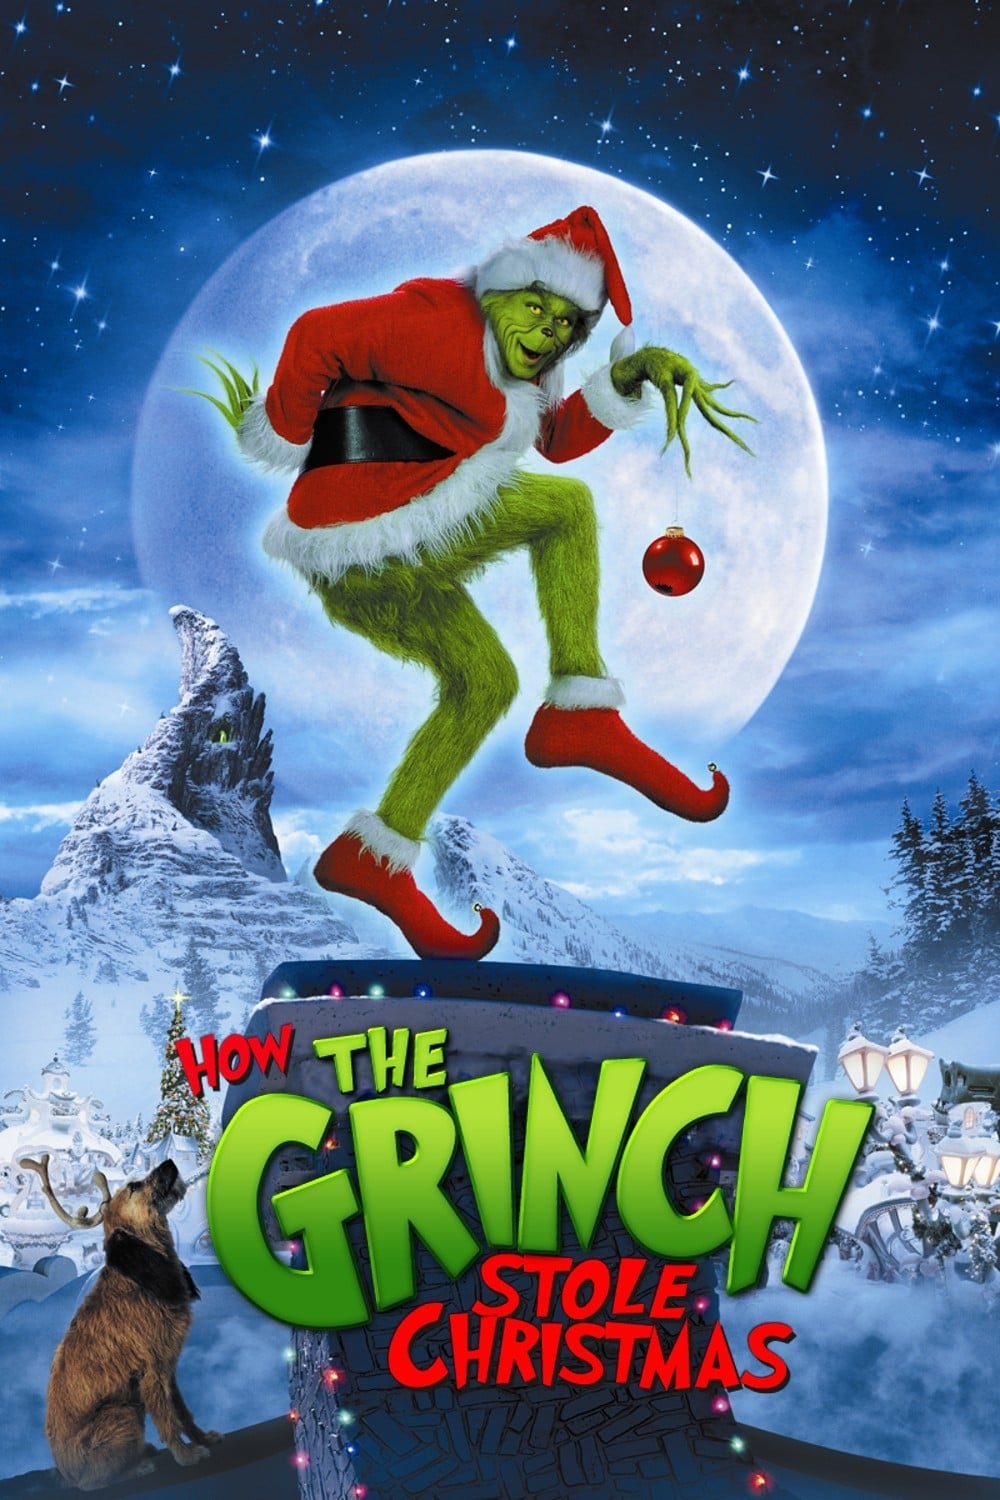 How The Grinch Stole Christmas (2000) - Humane Hollywood